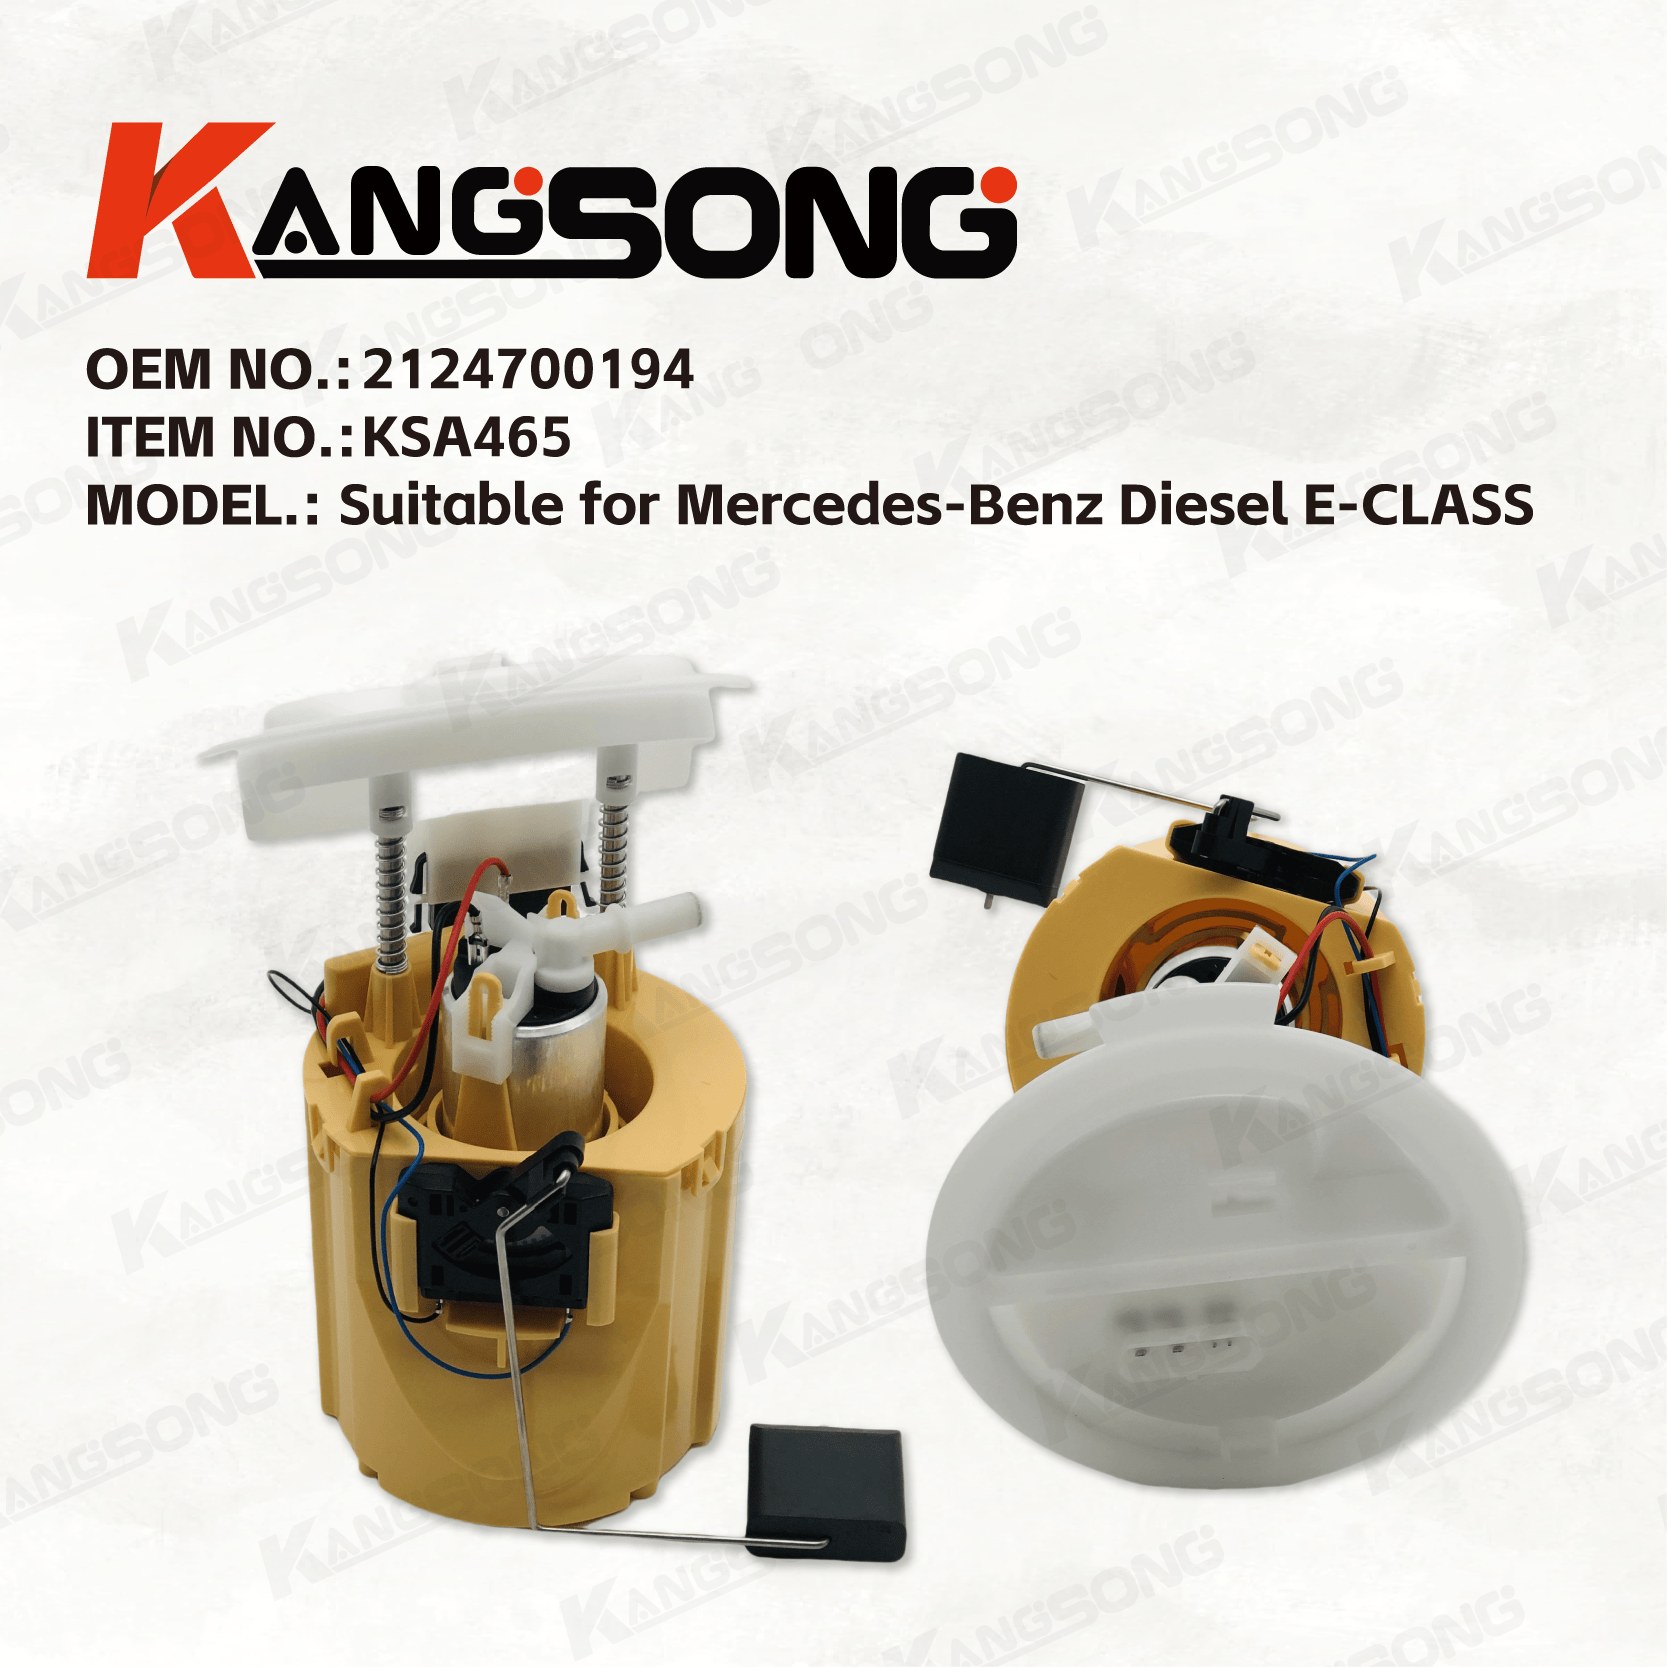 Applicable to Mercedes-Benz Diesel E-CLASS W212 S212 2009+ /  2124700194/ Fuel Pump Assembly/KS-A465